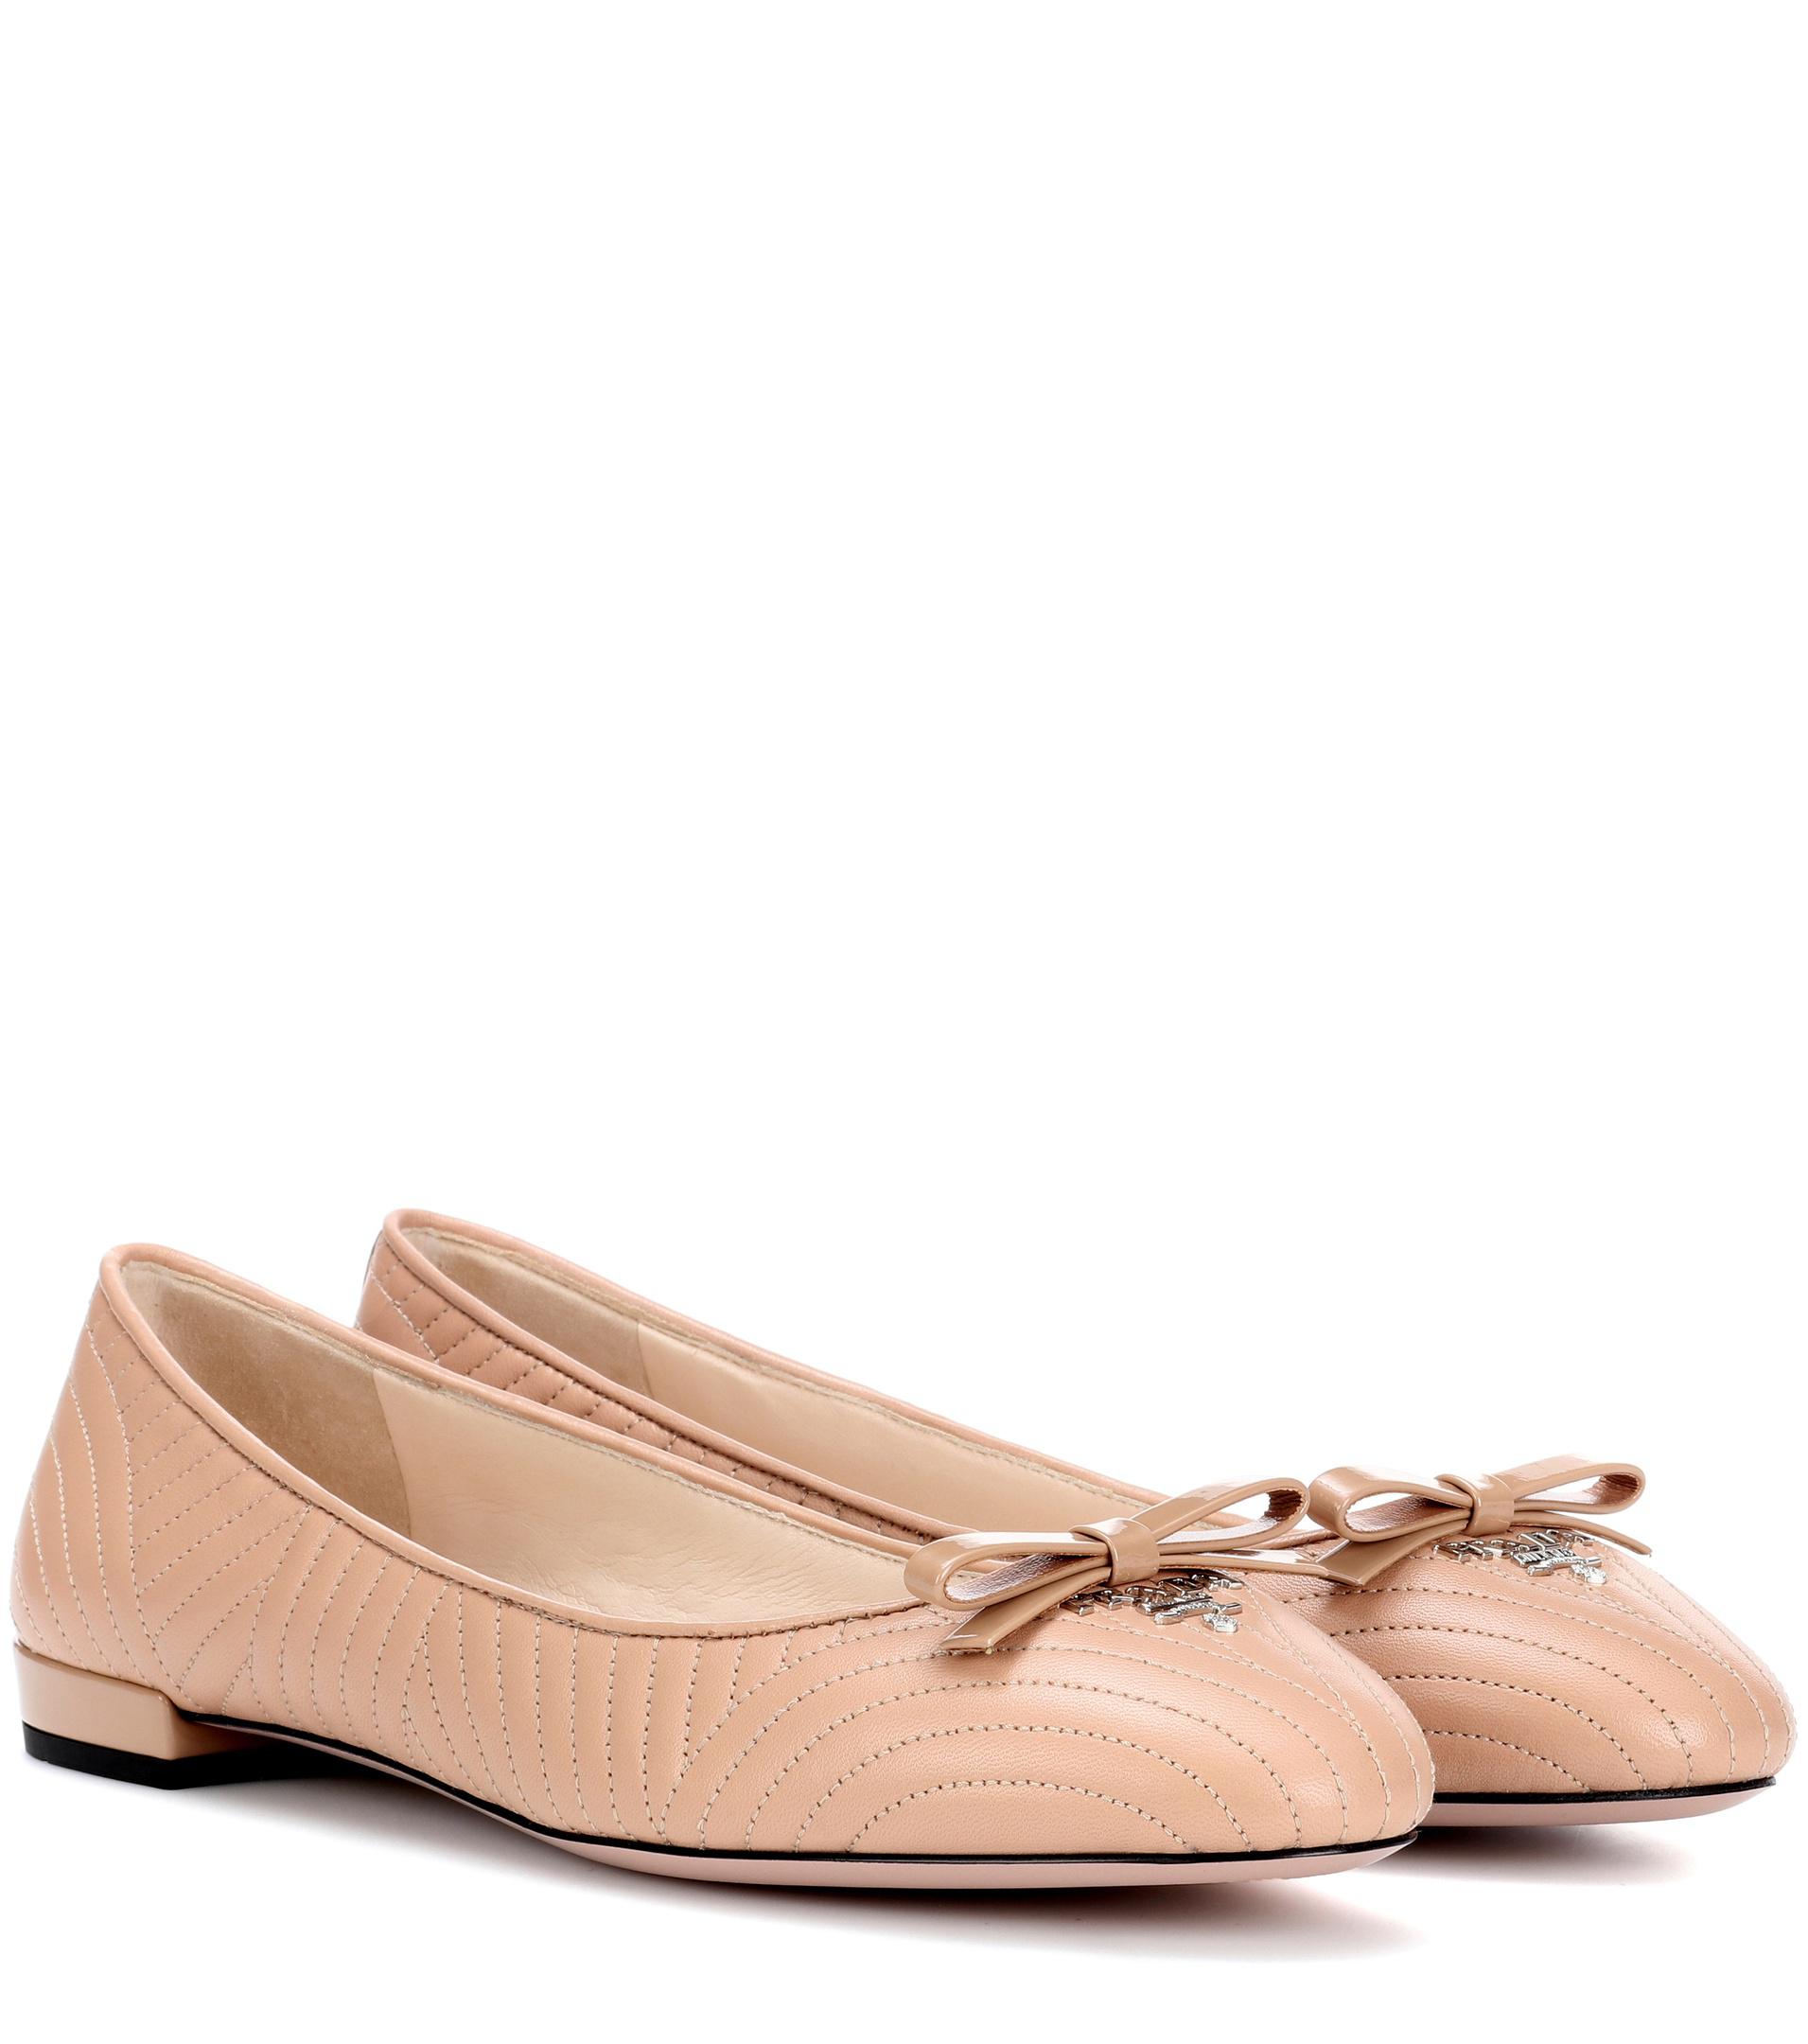 Prada Leather Ballerina Shoes in Pink - Lyst